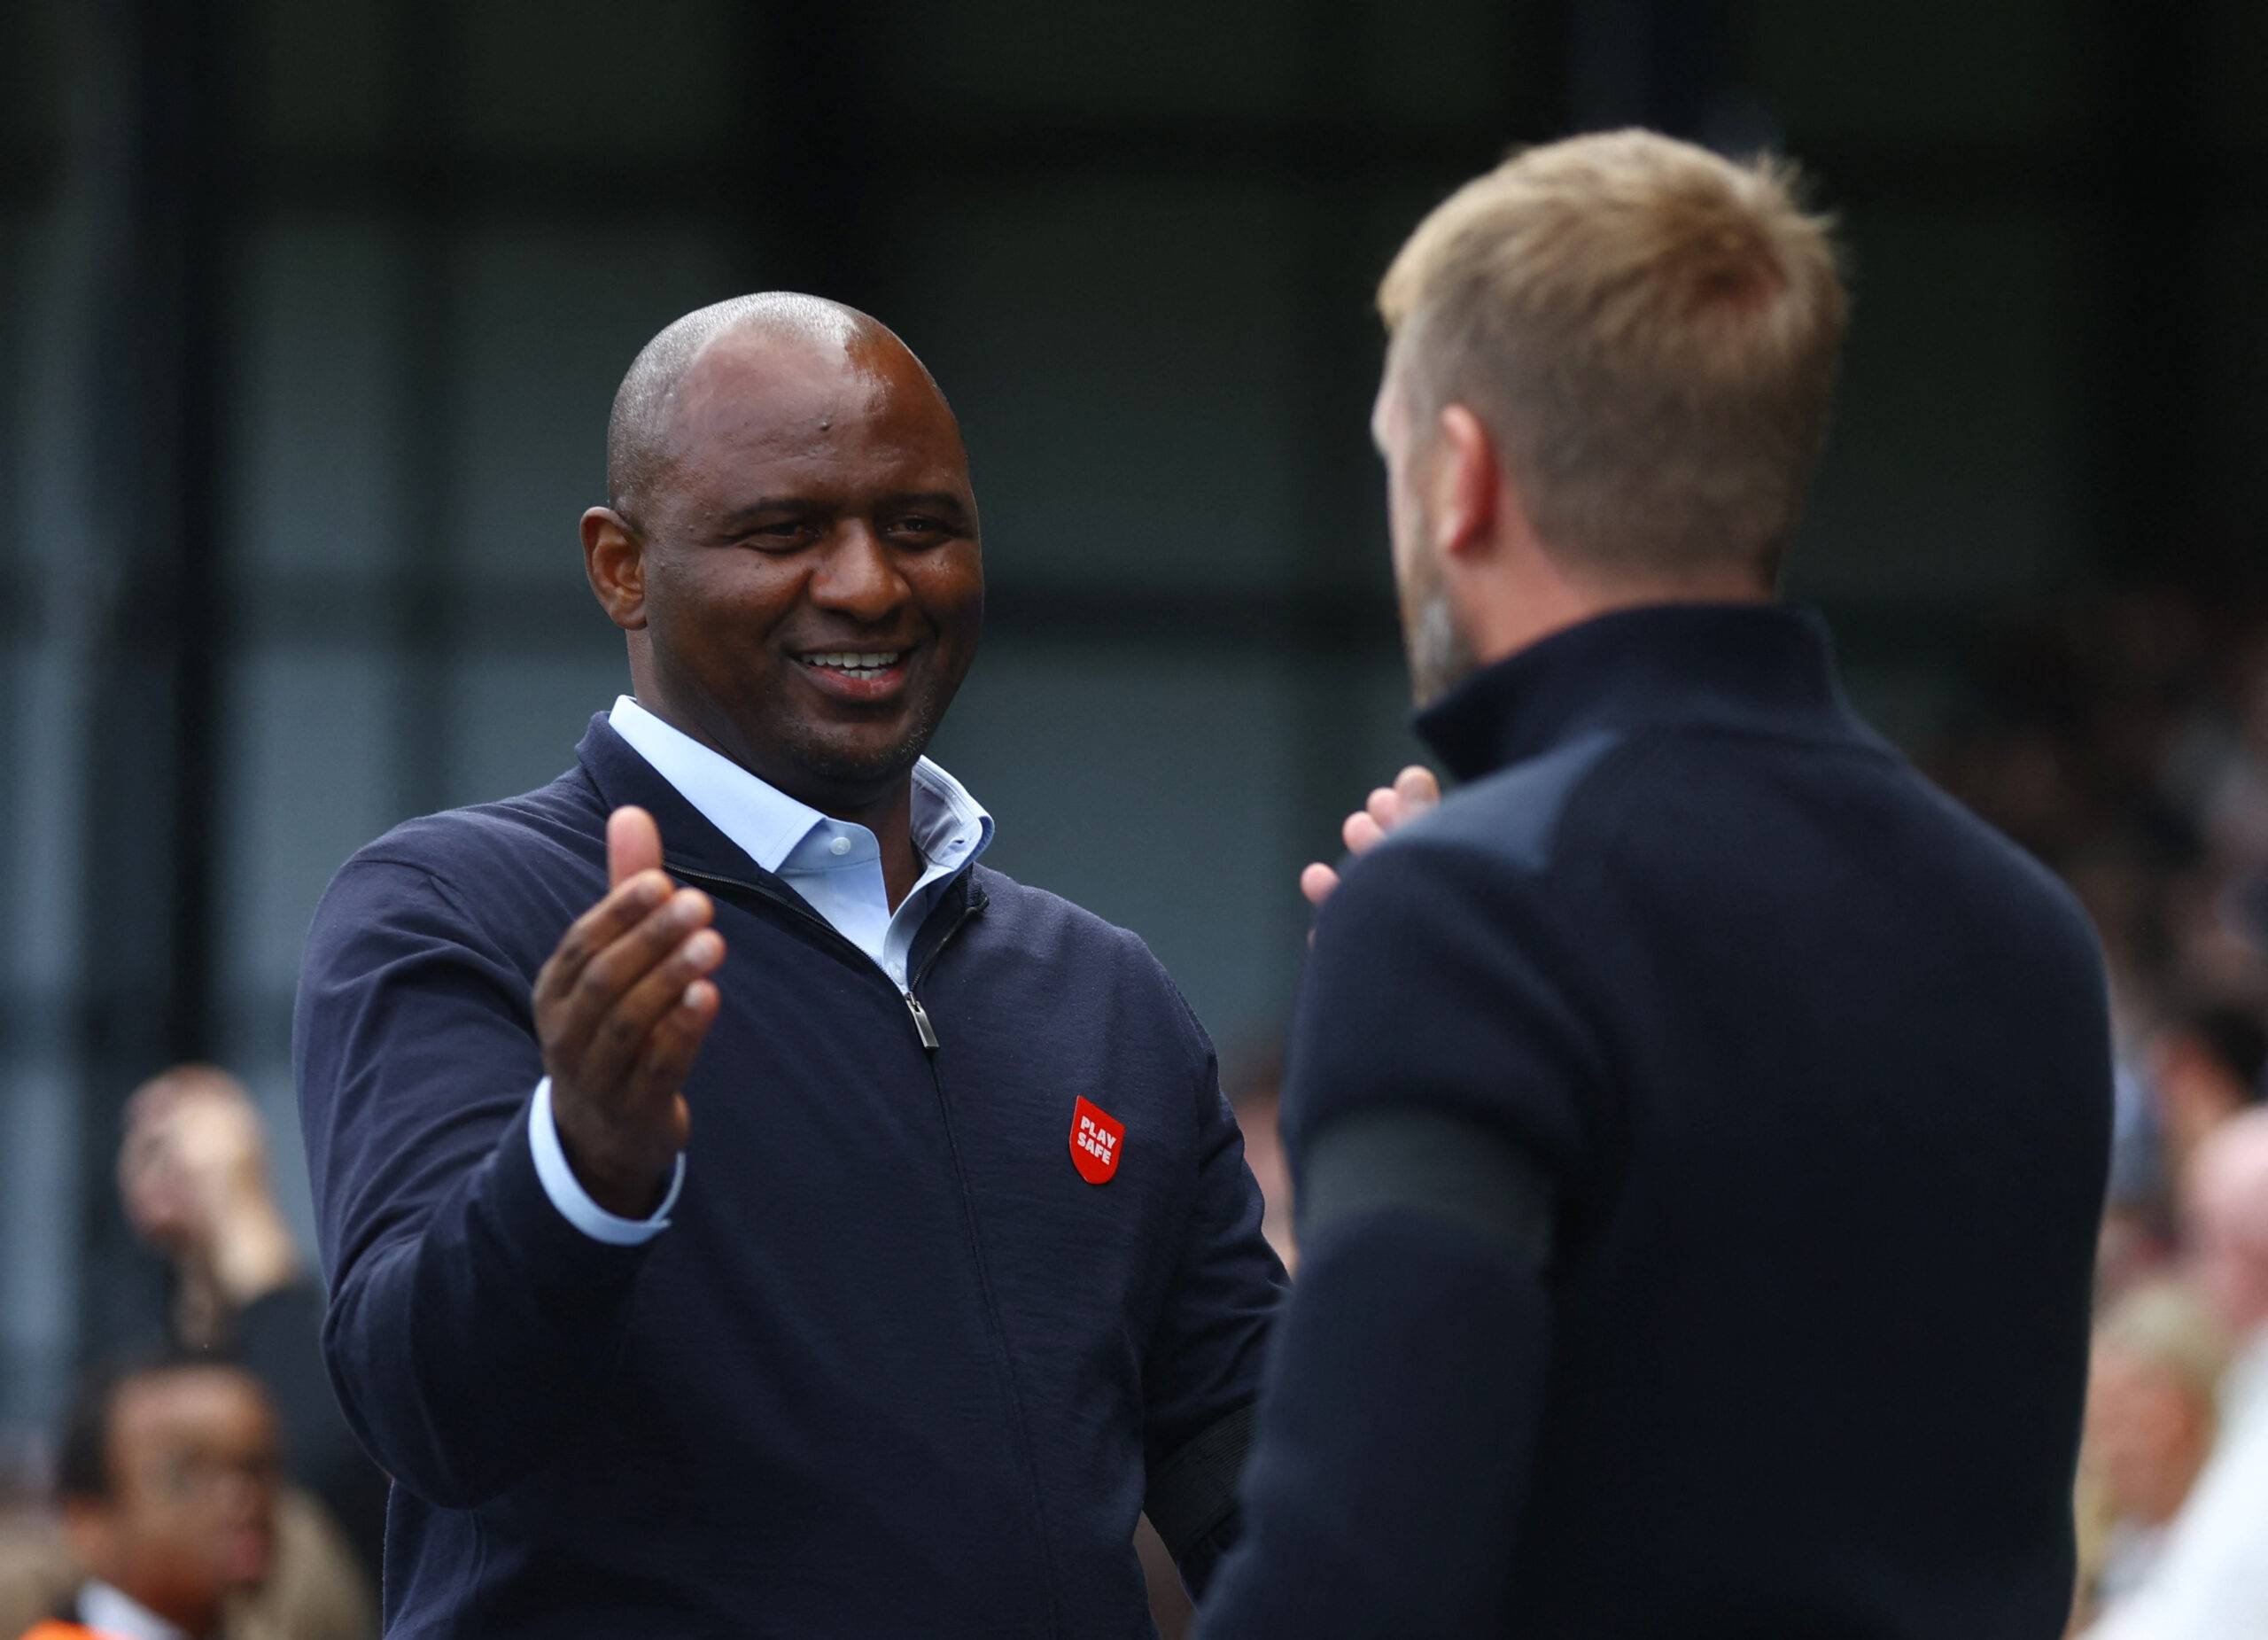 Crystal Palace manager Patrick Vieira shakes hands with Chelsea manager Graham Potter